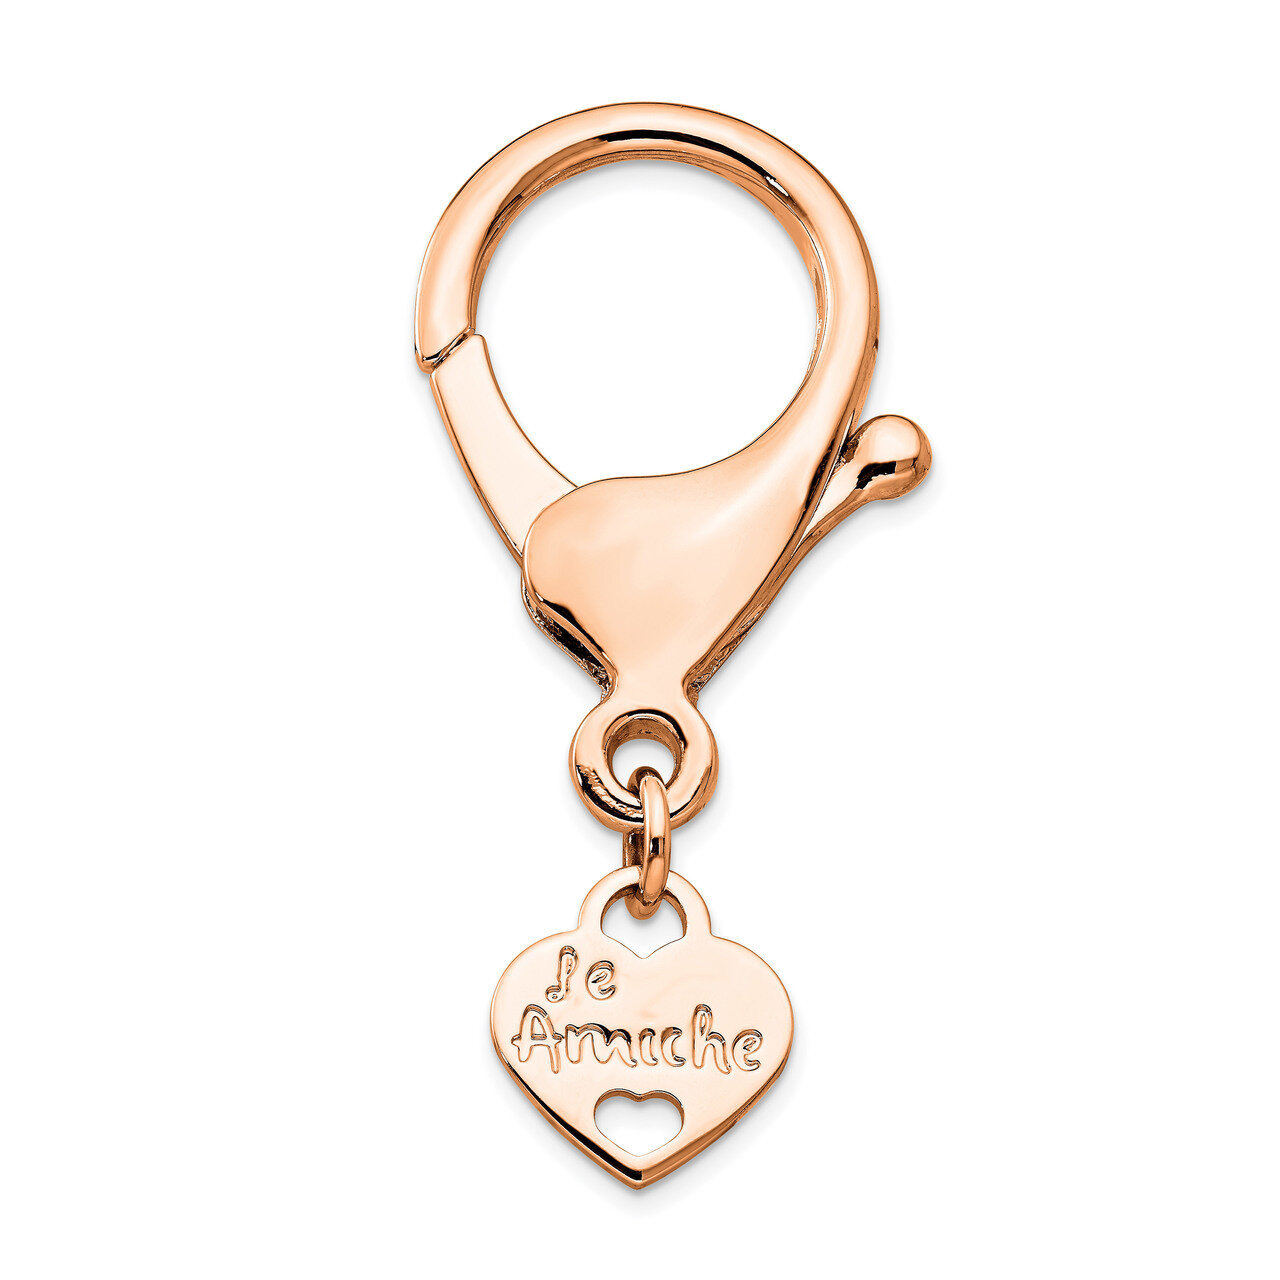 Le Amiche Rose-tone Keyring Connecting Clasp Le Amiche Rose-tone by Jere